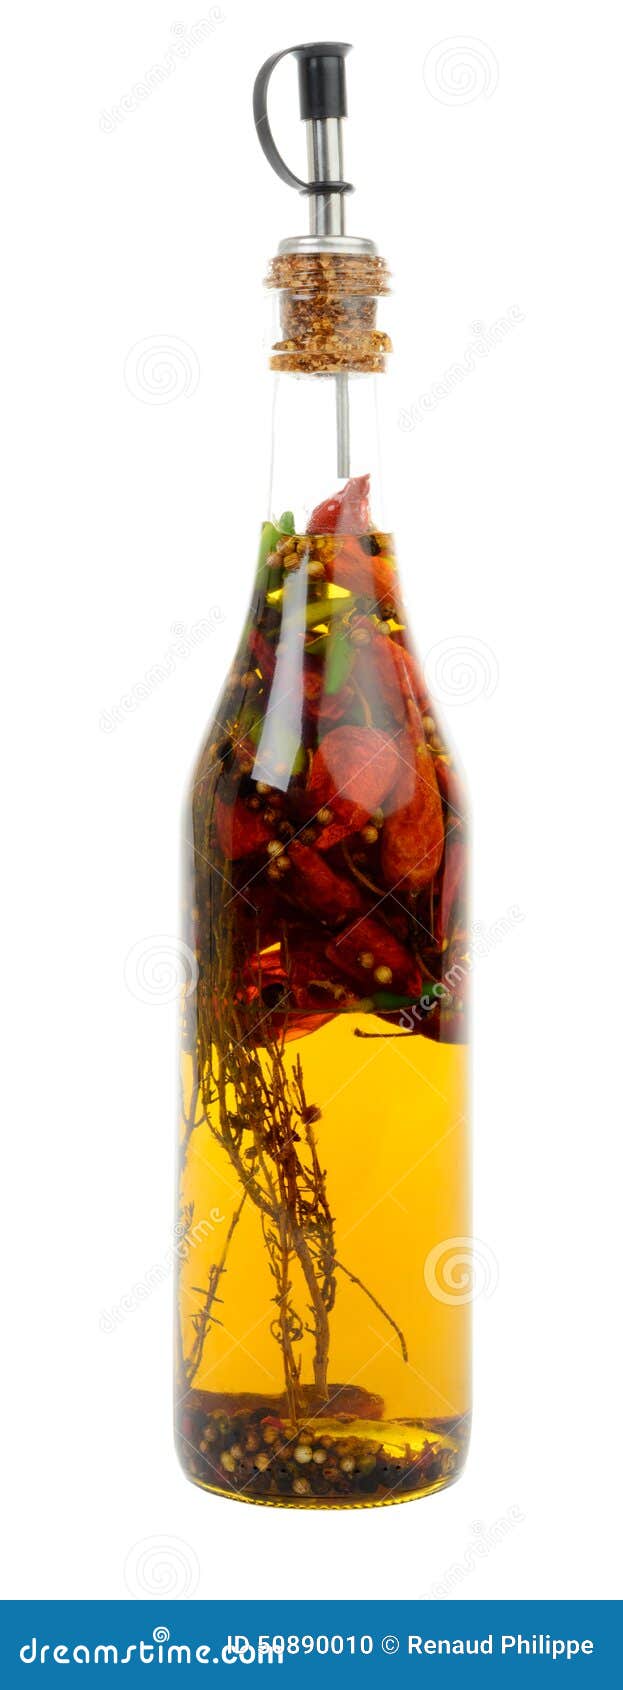 bottle with hot peppers and aromas